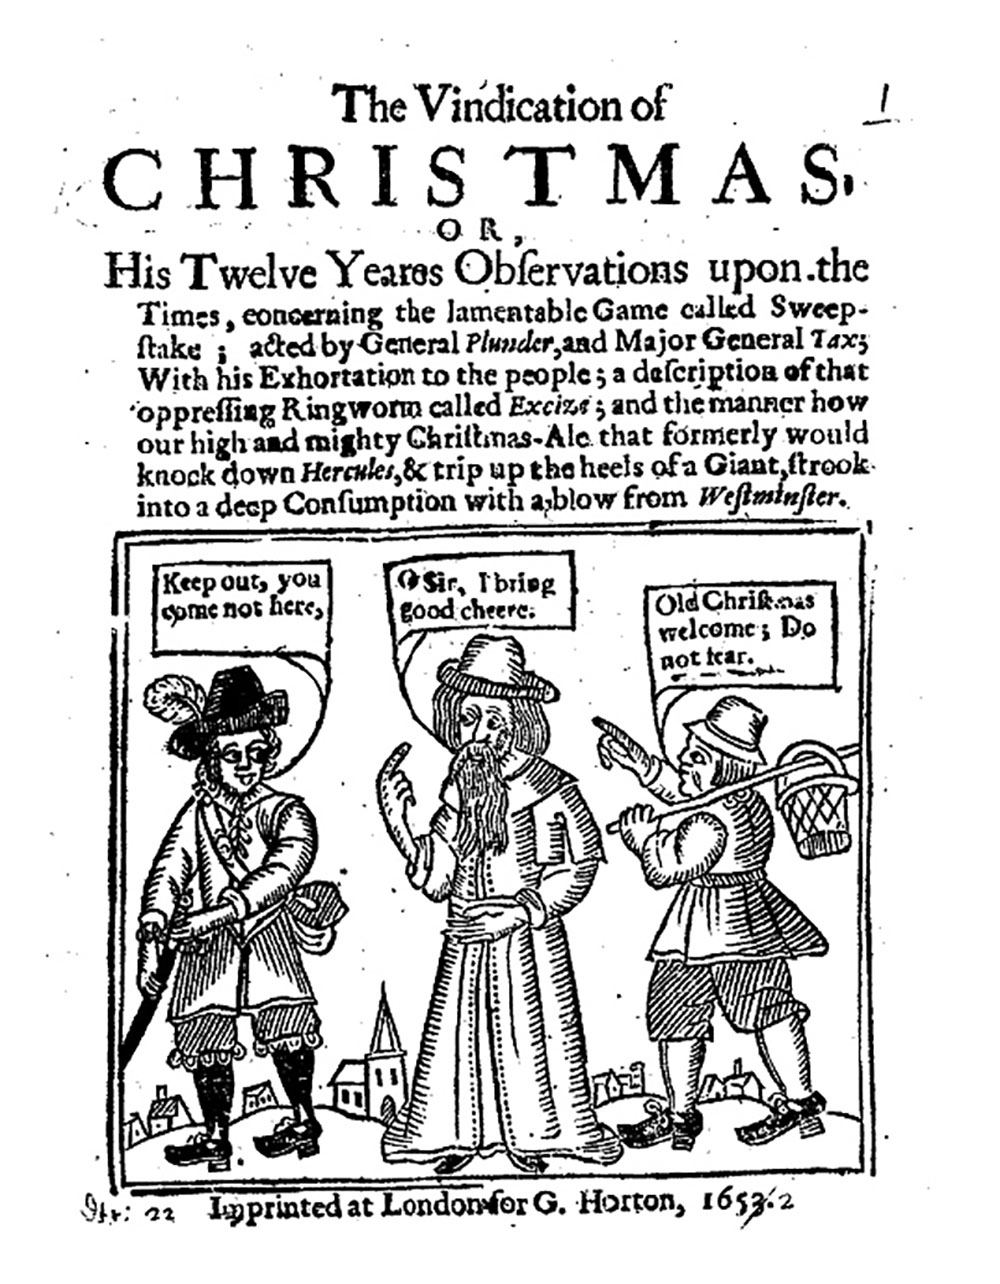 The Vindication of Christmas in 1652